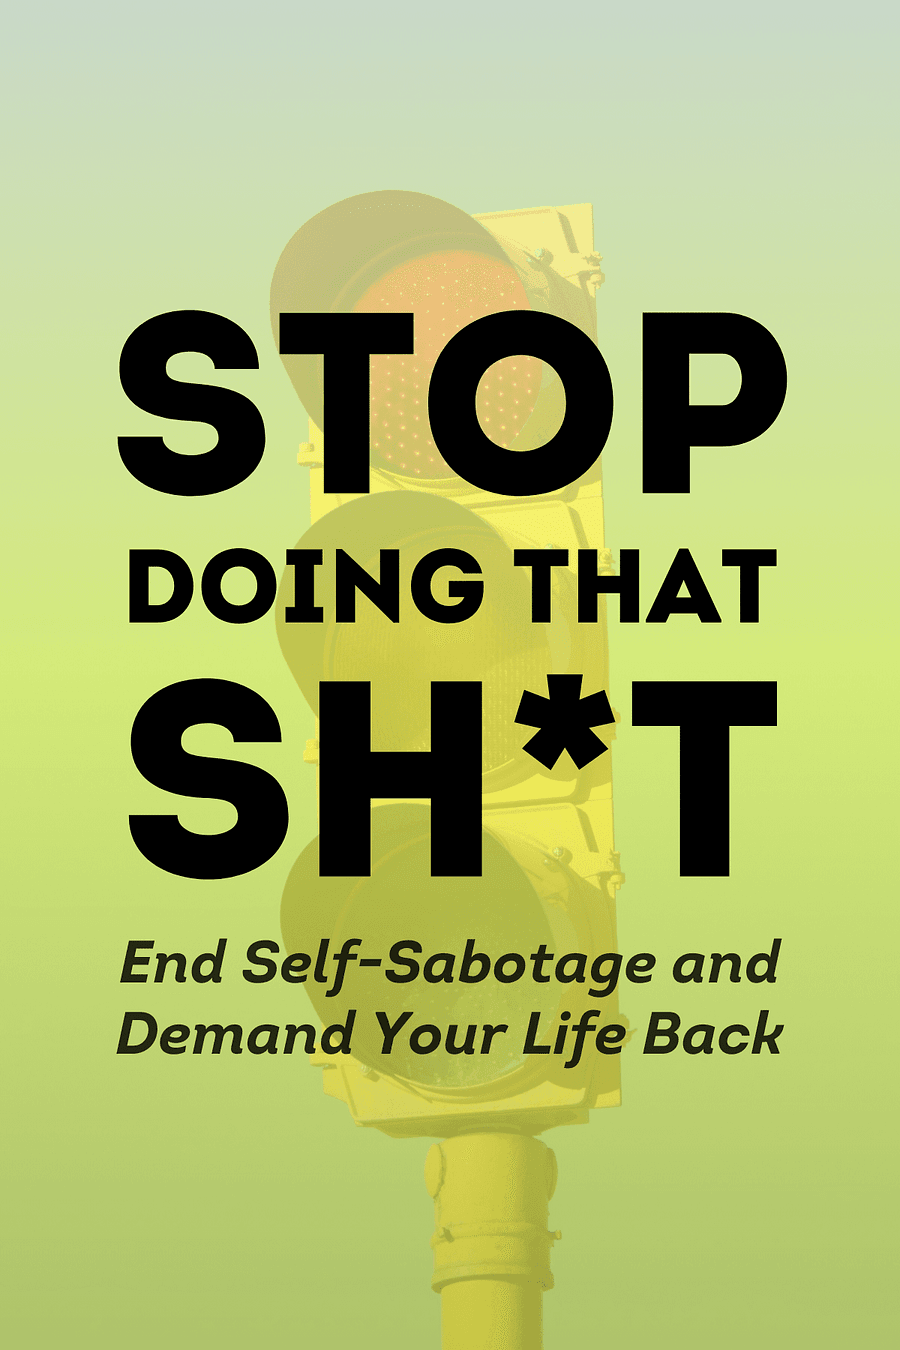 Stop Doing That Sh*t by Gary John Bishop - Book Summary